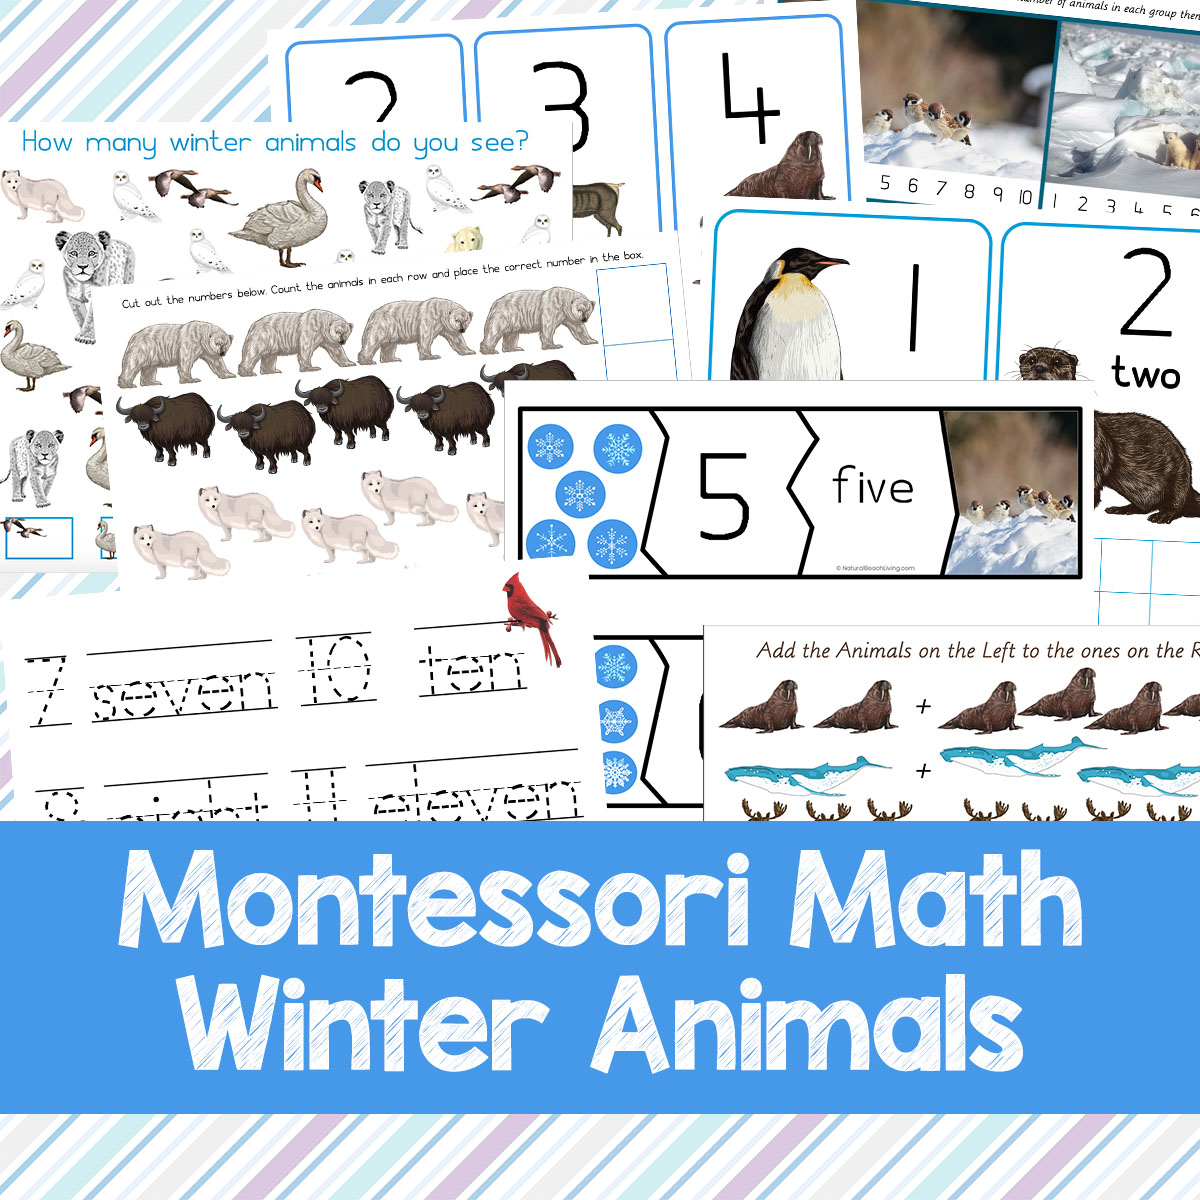 35+ Best Winter Preschool Themes, Preschool lesson plans, Preschool activities, and printables. Perfect for weekly or monthly themed learning and winter unit studies. You'll find Preschool book lists, preschool activities, Winter art and crafts for kids. Winter themes for preschool which include winter animals, winter science, STEM ideas, Slime recipes and more.